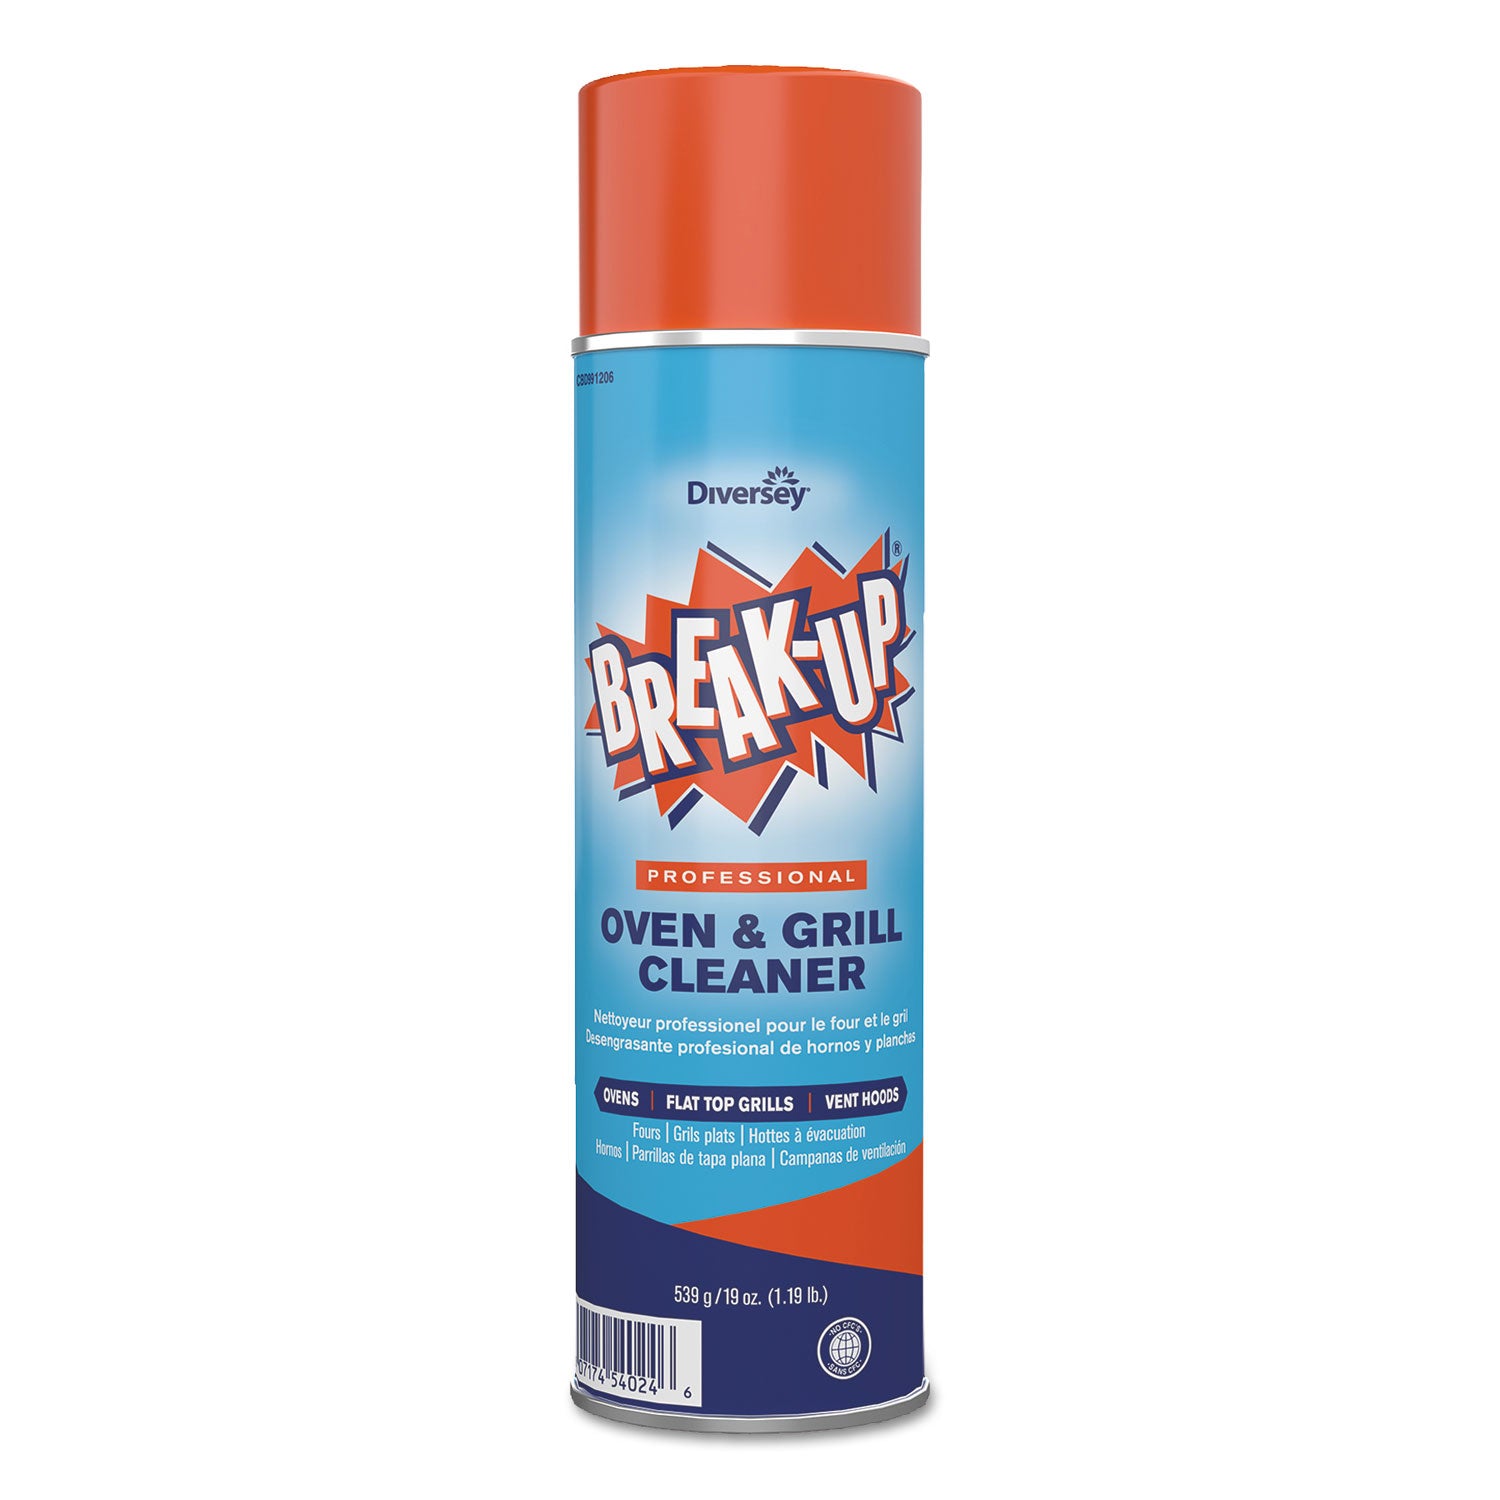 oven-and-grill-cleaner-ready-to-use-19-oz-aerosol-spray_dvocbd991206ea - 1